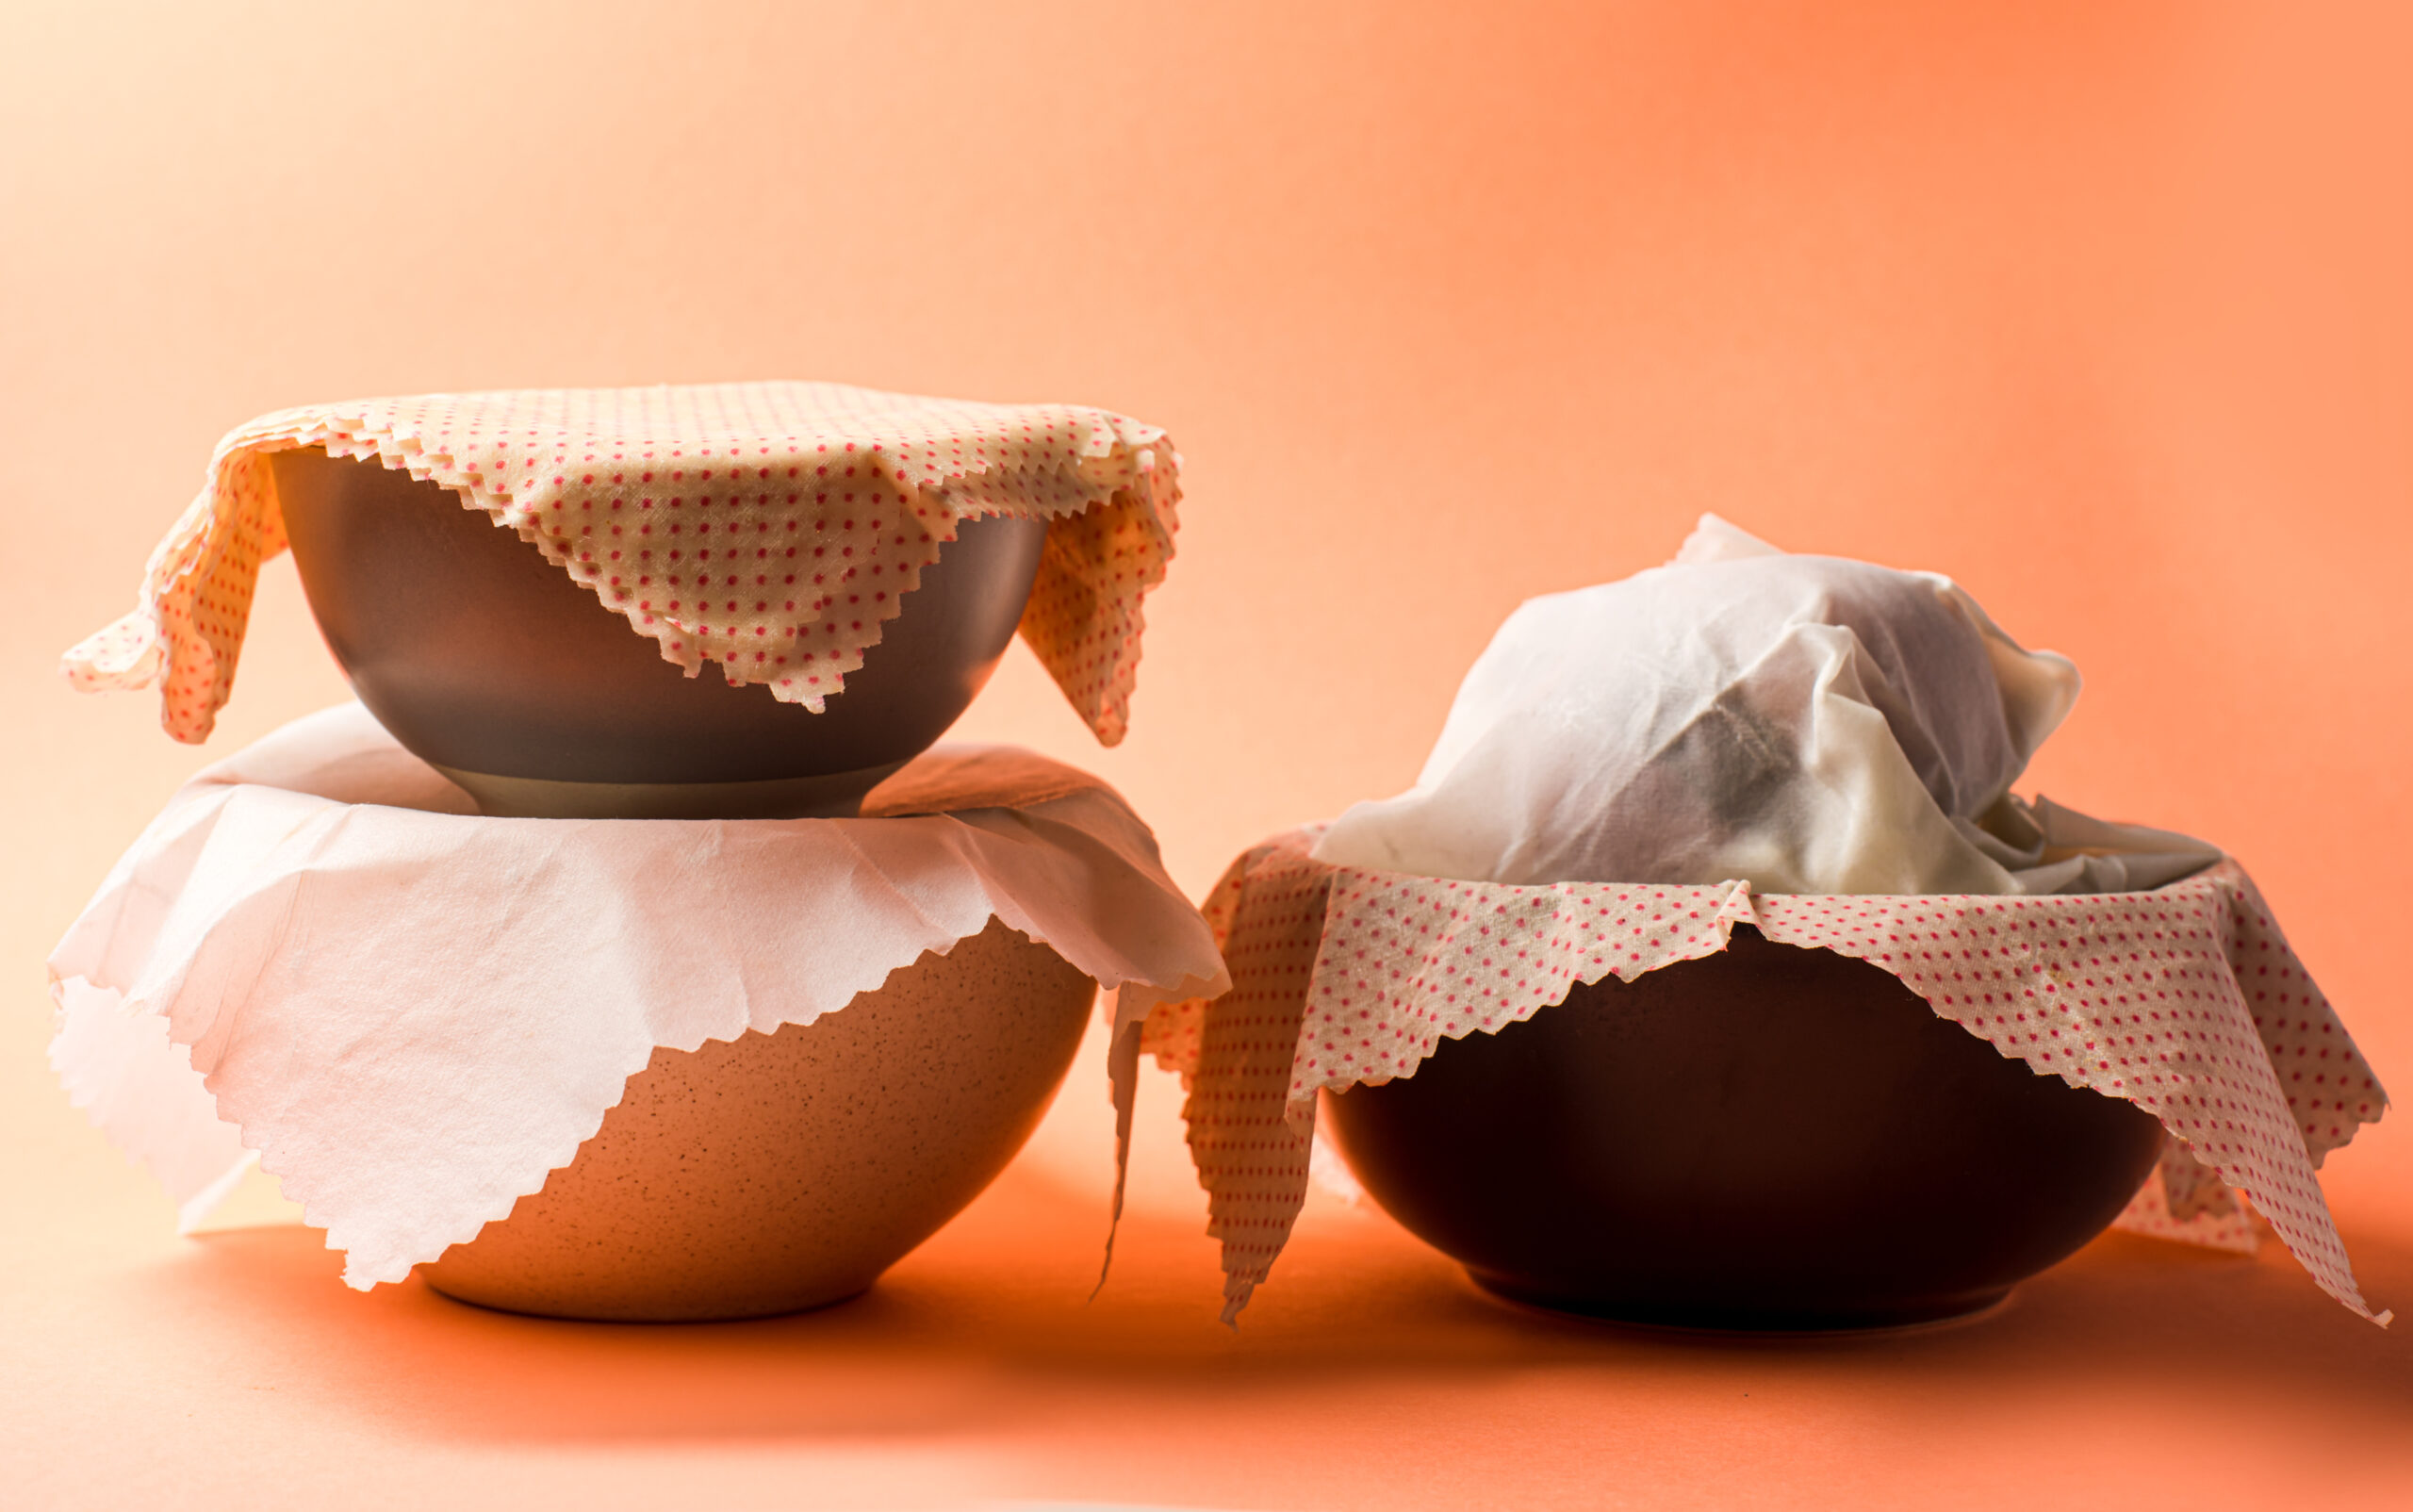 Several ceramic bowls covered with wax serviettes. Ecological type of packing or usage of wax cloth as lids for bowls. Bowls with food, isolated on light orange background.